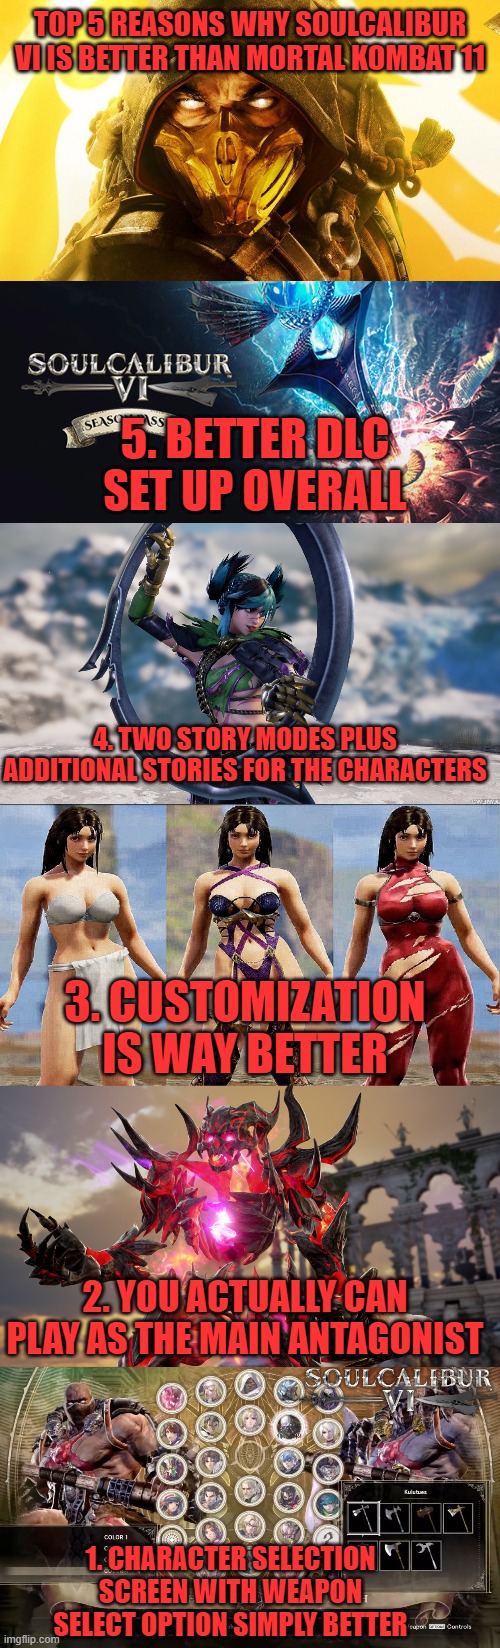 TOP 5 REASONS WHY SOULCALIBUR VI IS BETTER THAN MORTAL KOMBAT 11; 5. BETTER DLC SET UP OVERALL; 4. TWO STORY MODES PLUS ADDITIONAL STORIES FOR THE CHARACTERS; 3. CUSTOMIZATION IS WAY BETTER; 2. YOU ACTUALLY CAN PLAY AS THE MAIN ANTAGONIST; 1. CHARACTER SELECTION SCREEN WITH WEAPON SELECT OPTION SIMPLY BETTER | image tagged in mortal kombat,soulcalibur,fighting,dlcs,weapons | made w/ Imgflip meme maker